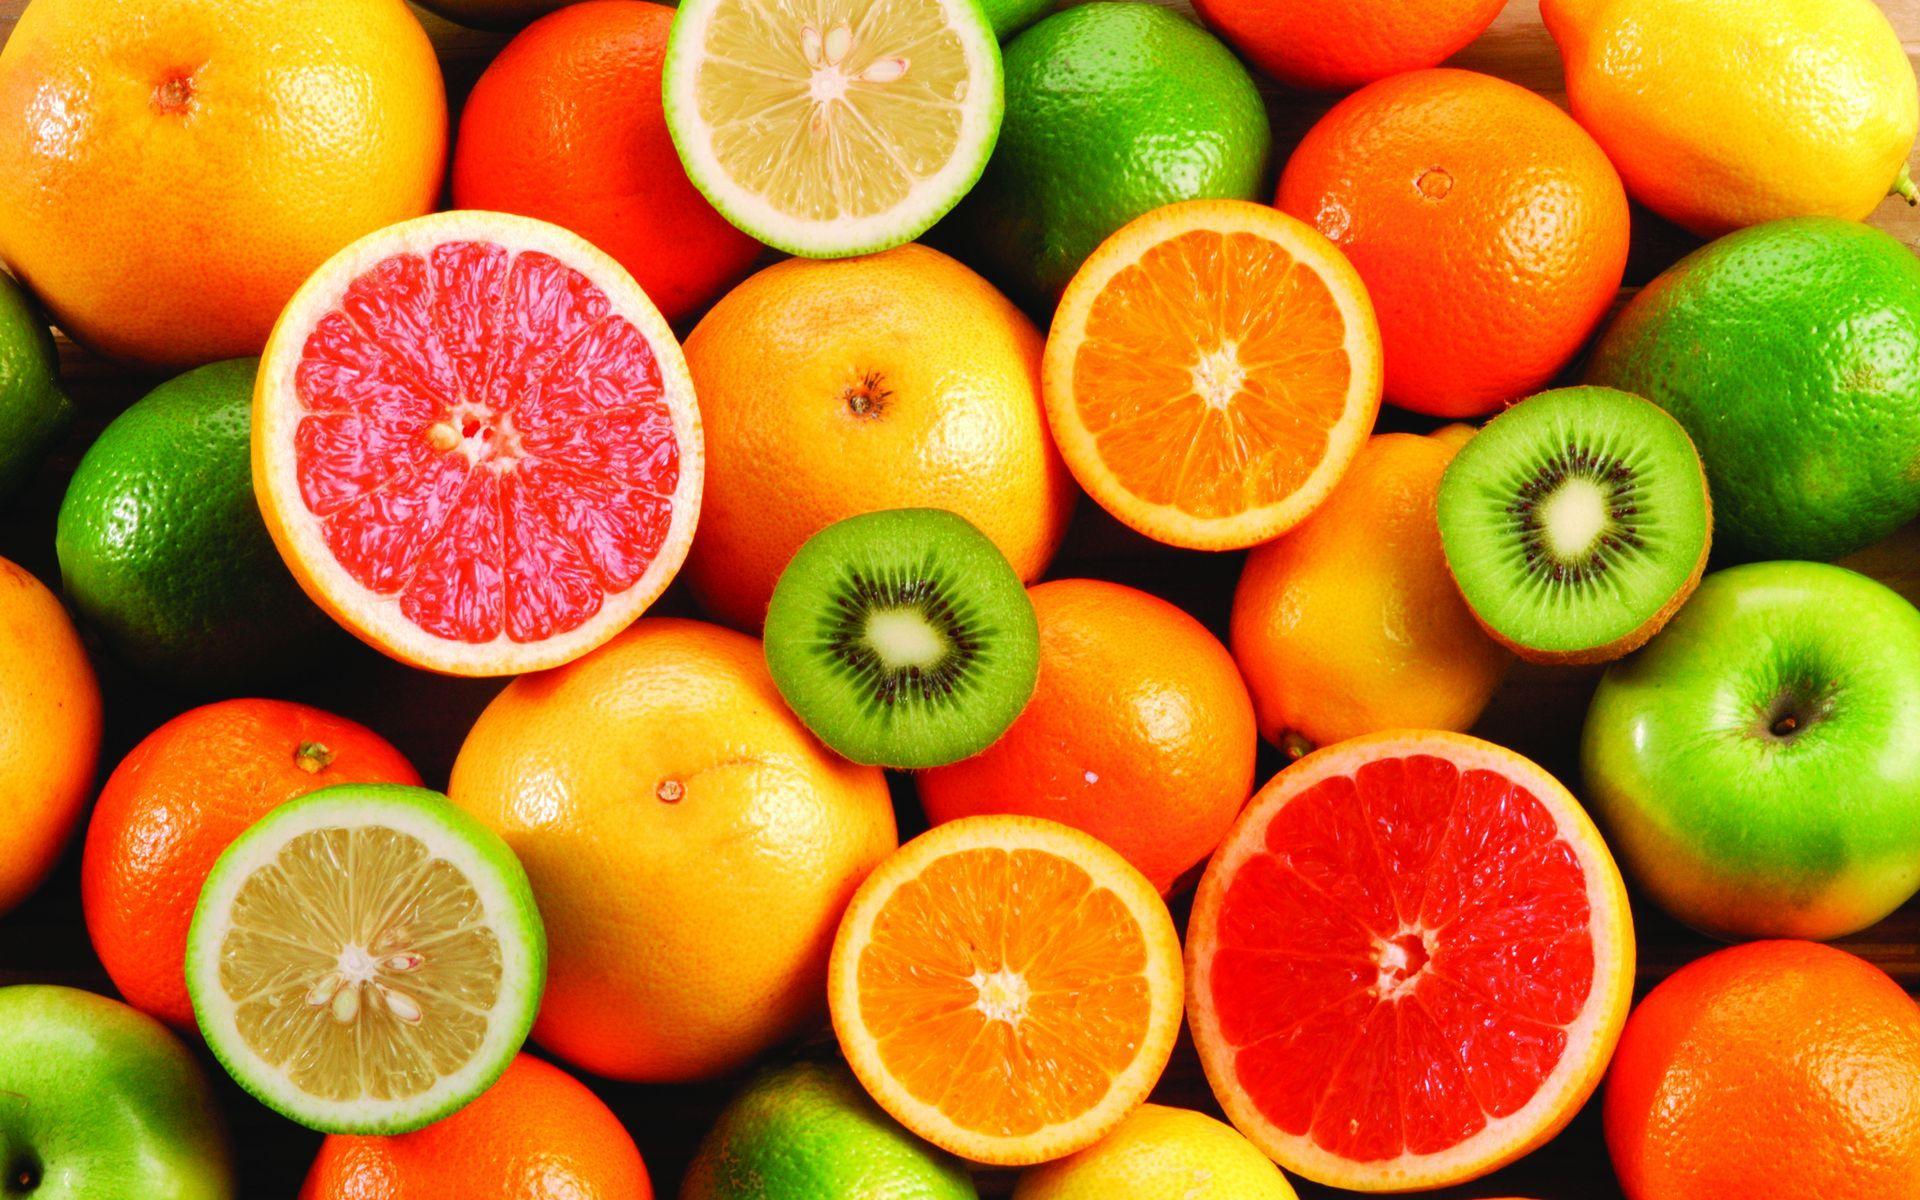 Mobile Fruits Picture- 4K Ultra HD Wallpaper and Picture